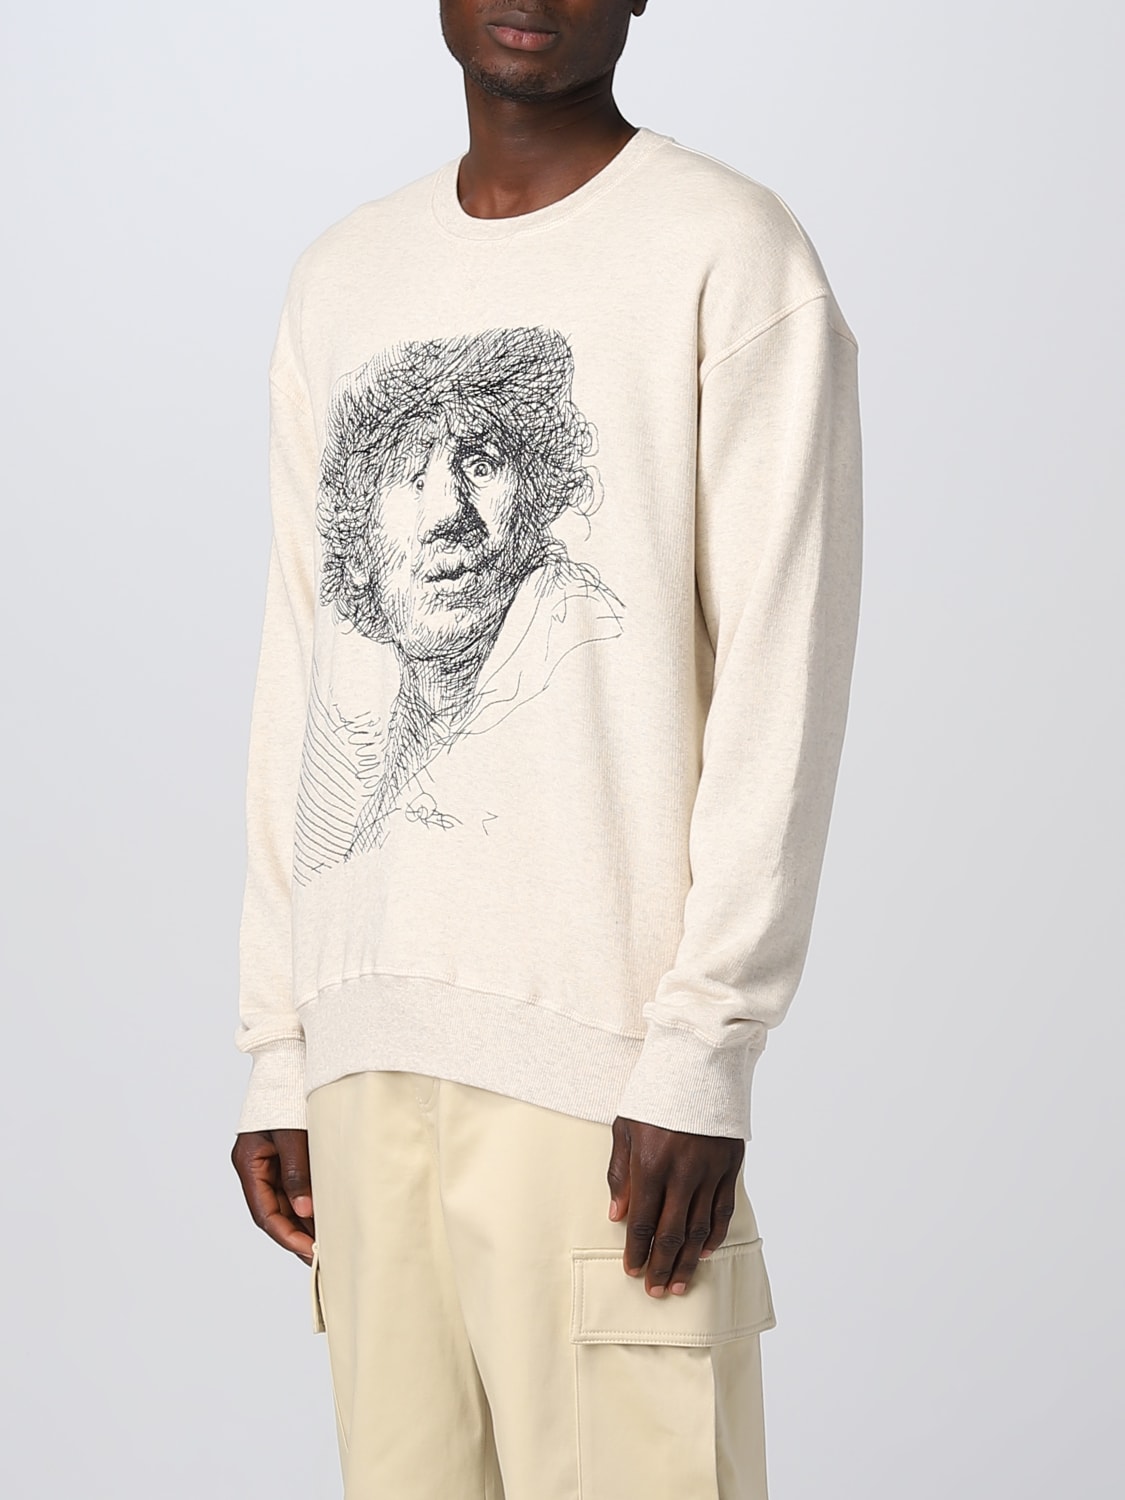 Temmelig Neuropati voldsom JW ANDERSON: sweatshirt for man - Beige | Jw Anderson sweatshirt  JW0078PG0909 online on GIGLIO.COM